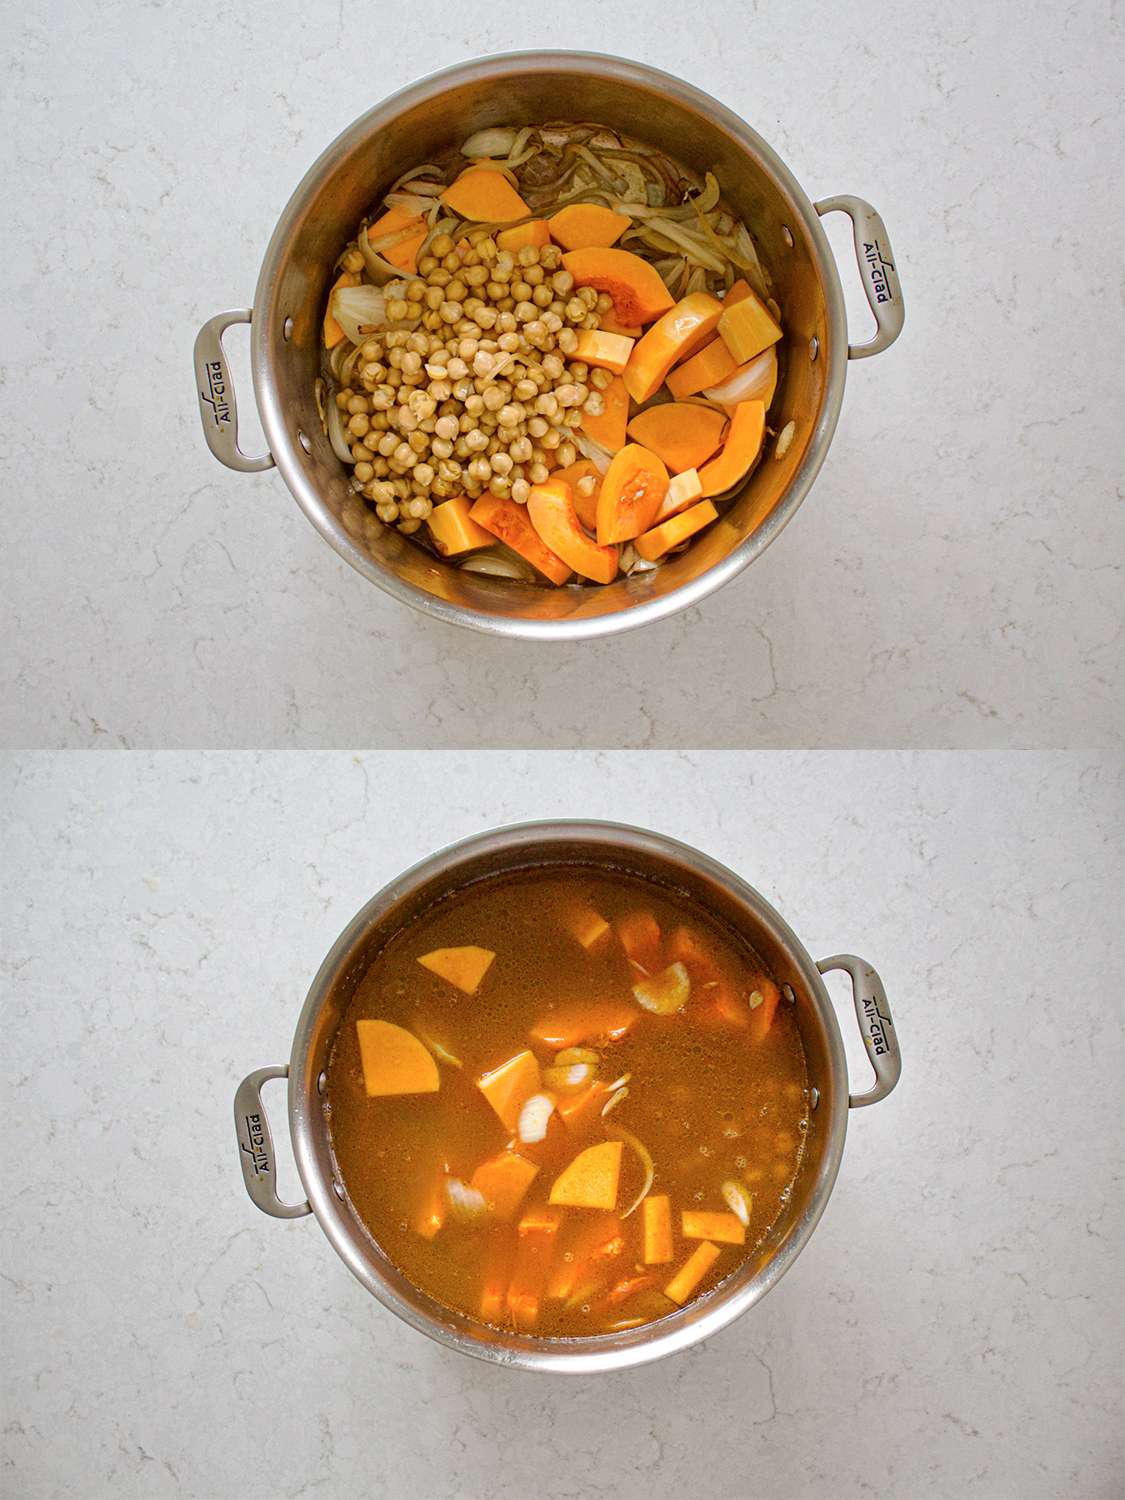 Two Image collage. Top: Butternut Squash mixed with onions and chickpeas. Bottom: butternut squash mixture cooking in stock